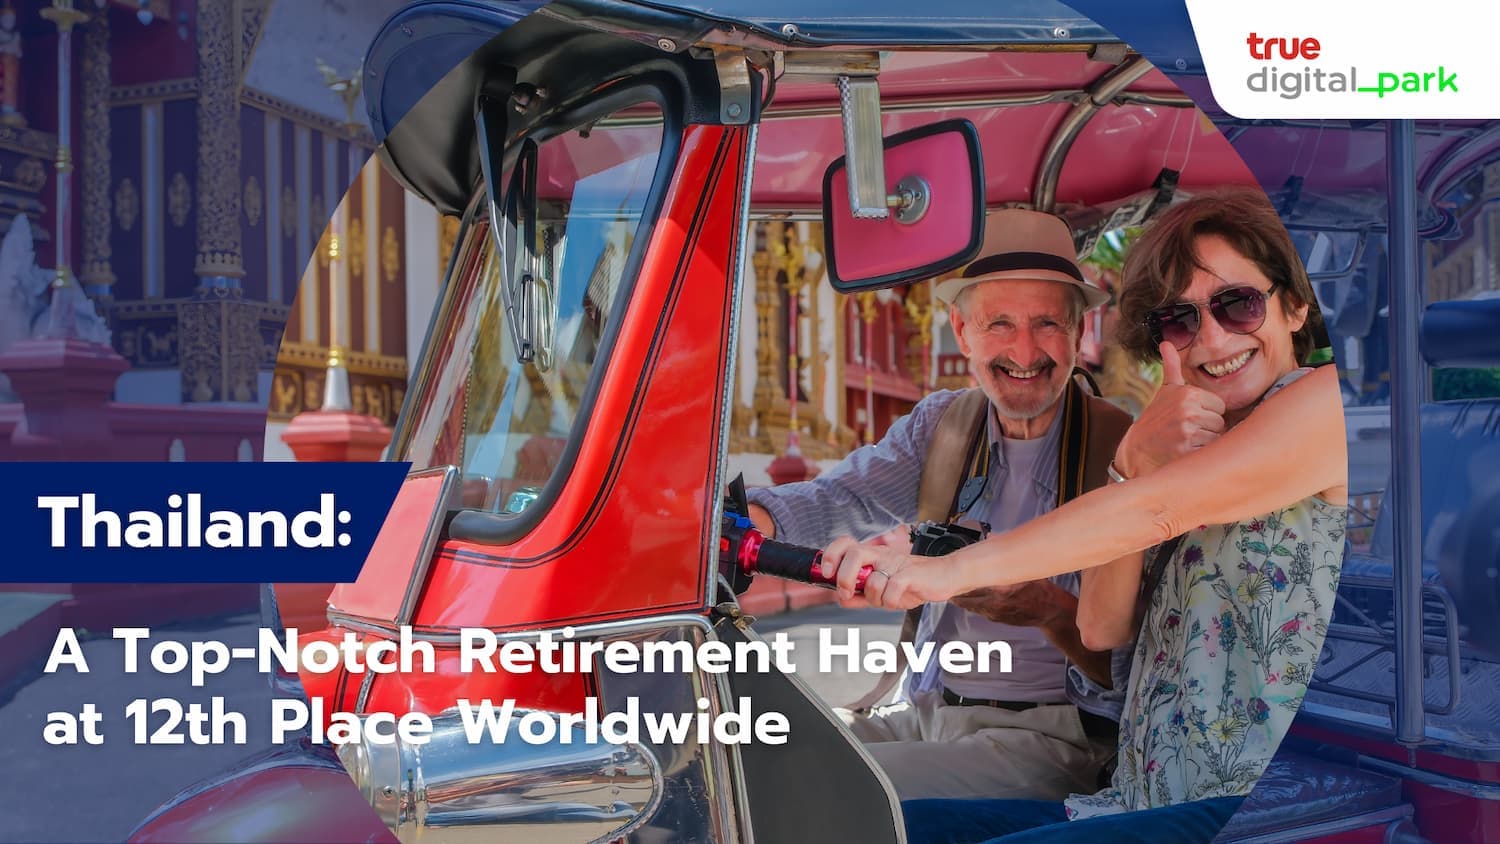 Thailand: A Top-Notch Retirement Haven at 12th Place Worldwide